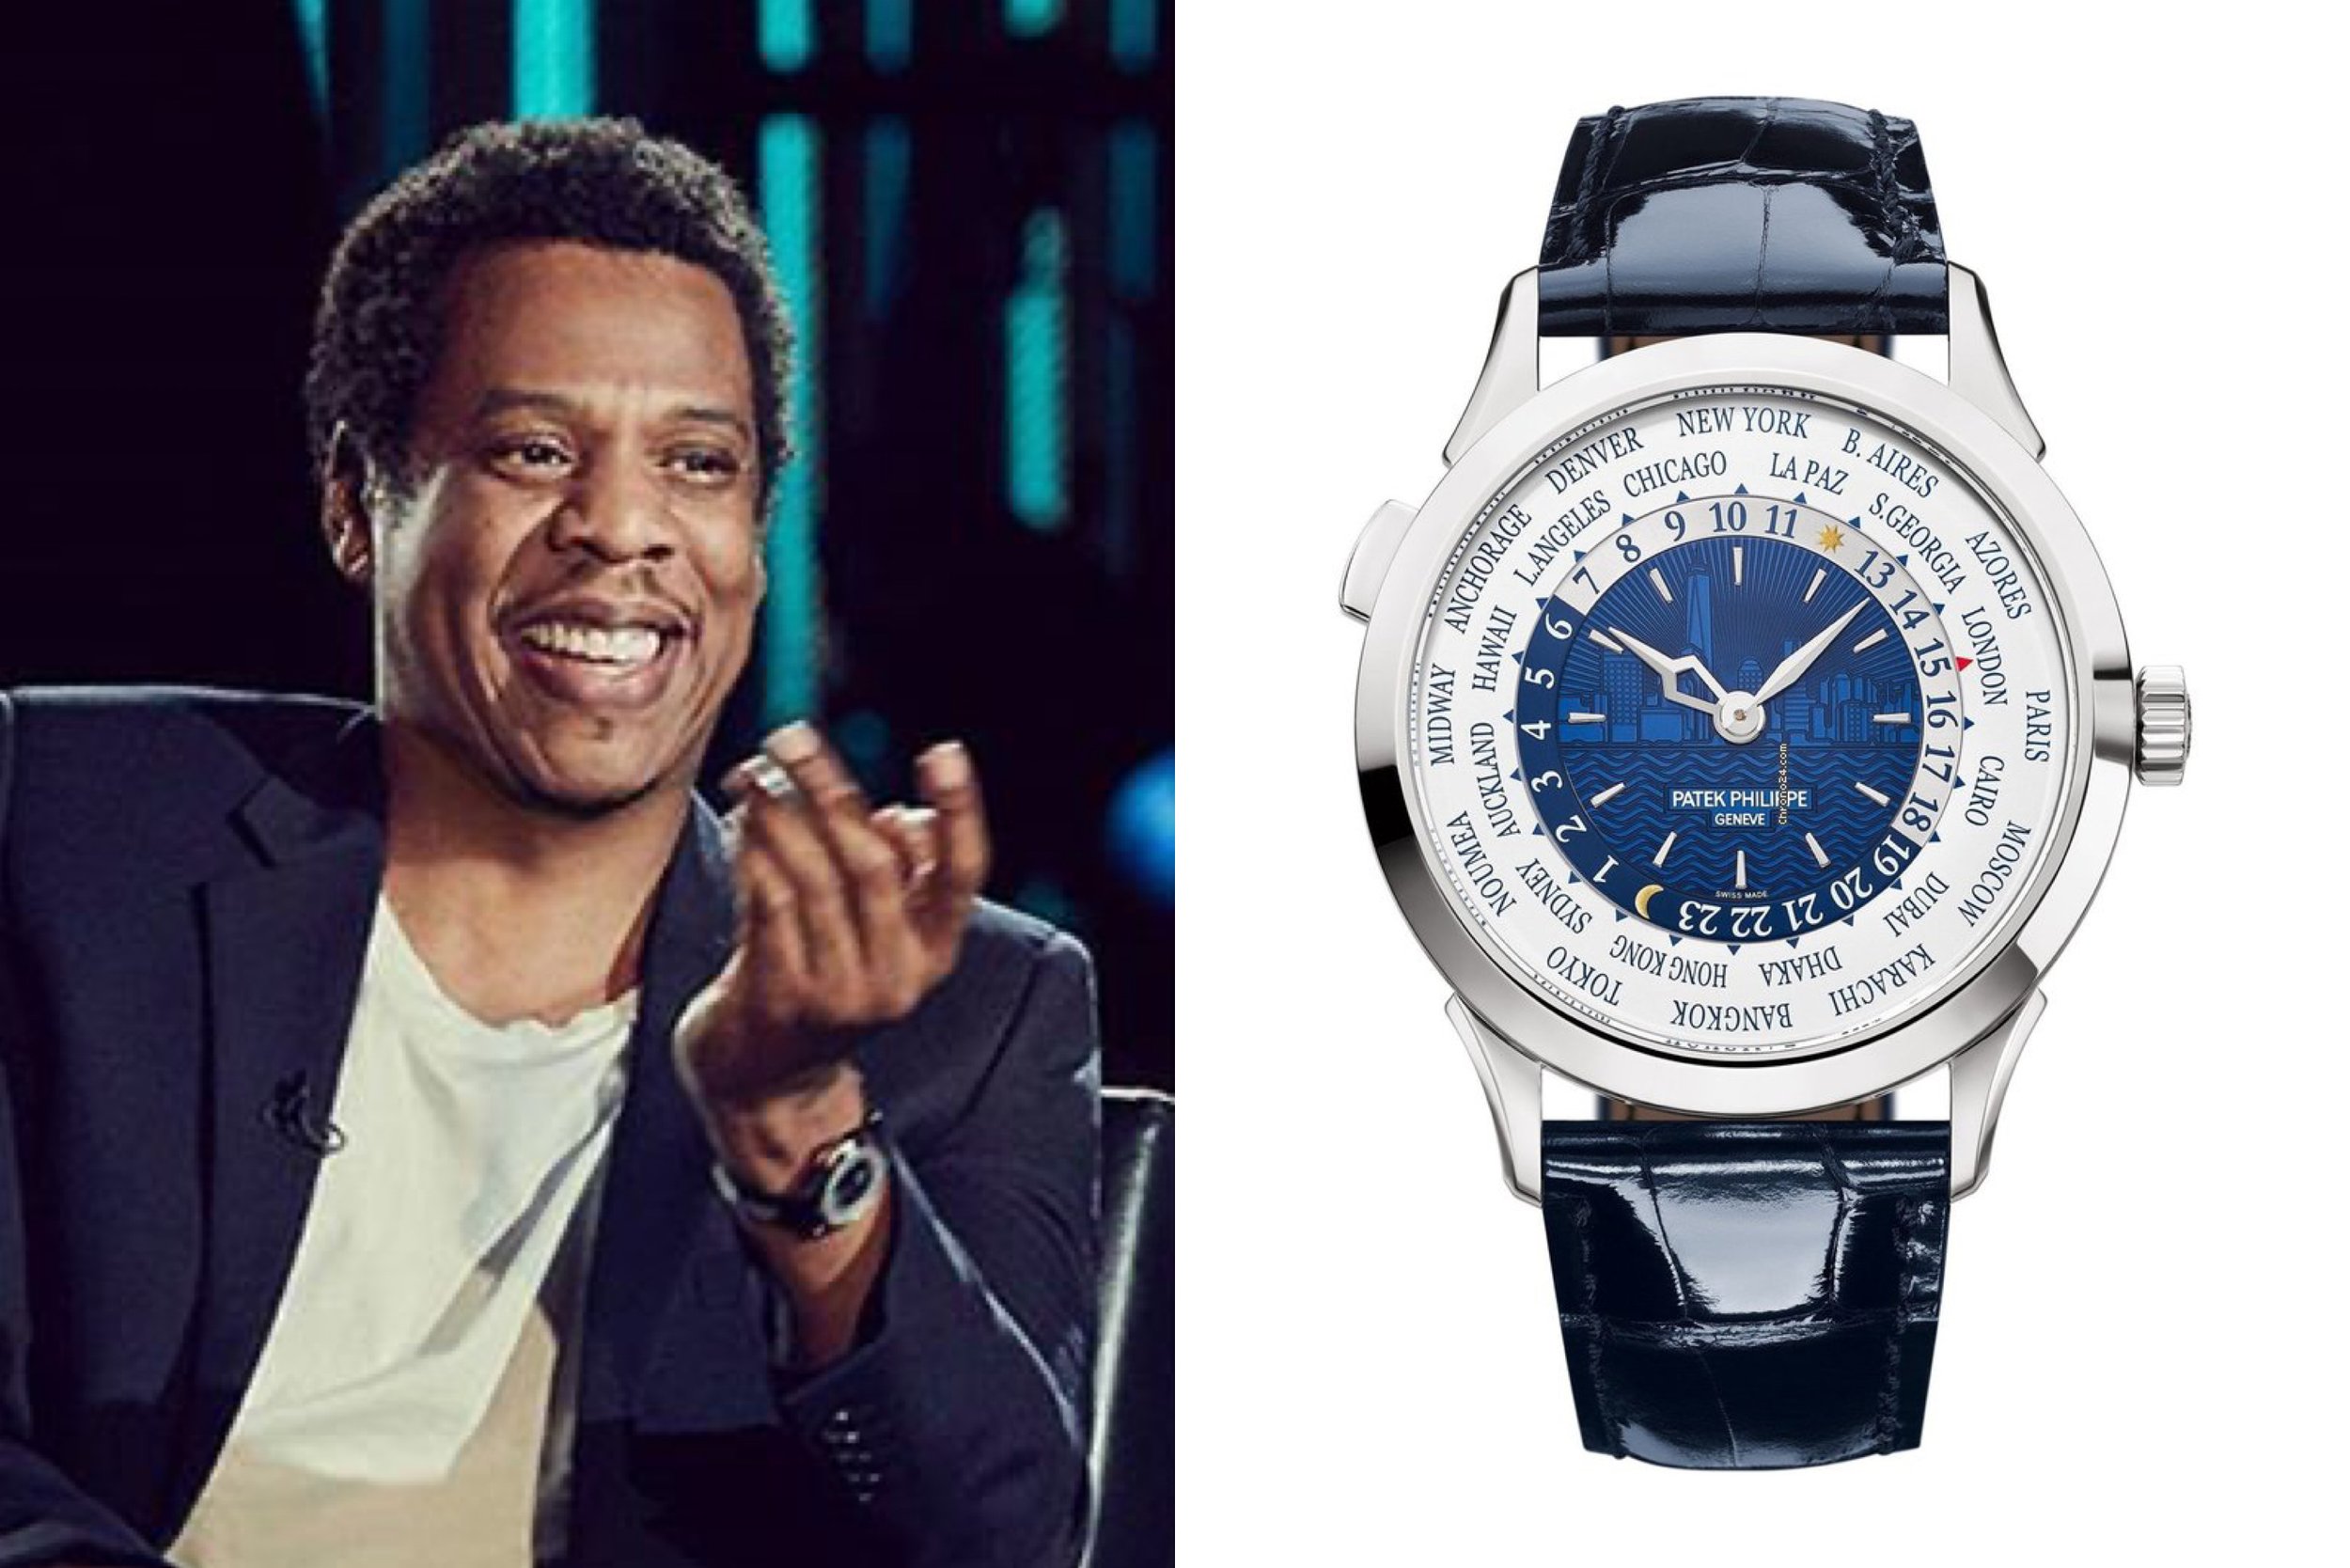 Jay-Z Rocks Another Rare Watch, This Time a Patek Philippe Nautilus in  Tiffany-Blue Valued in the Millions